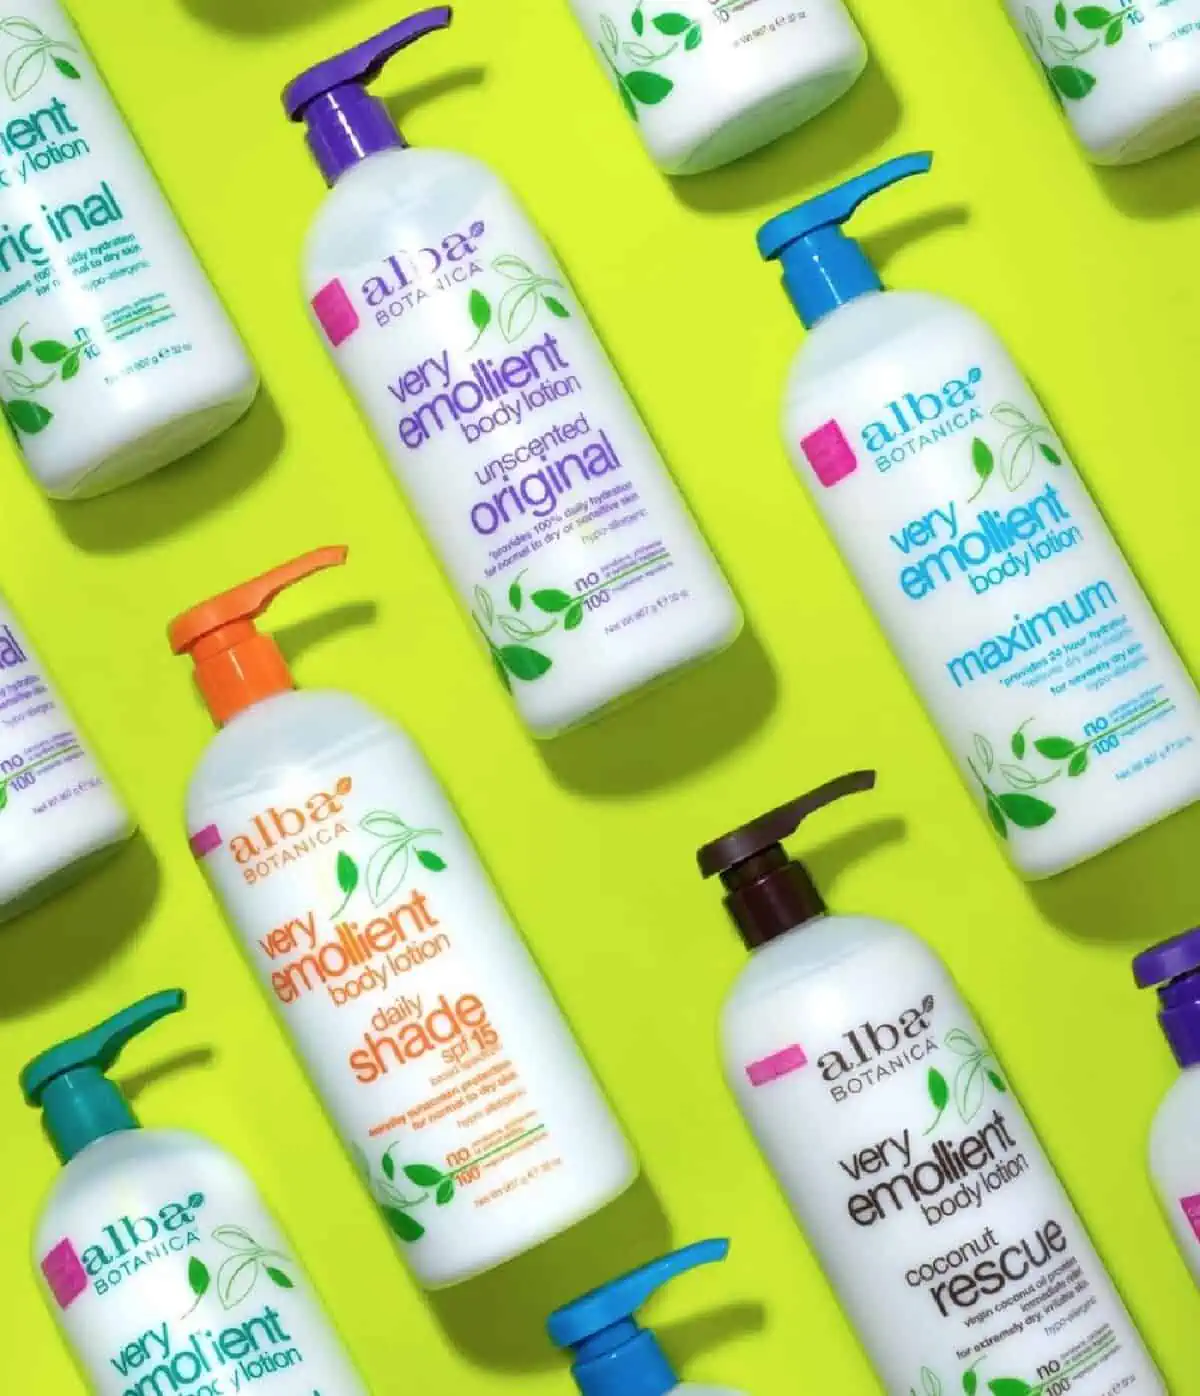 Several large bottles of Alba Botanica Very Emollient Body Lotion arranged in diagonal rows on a lime green background.